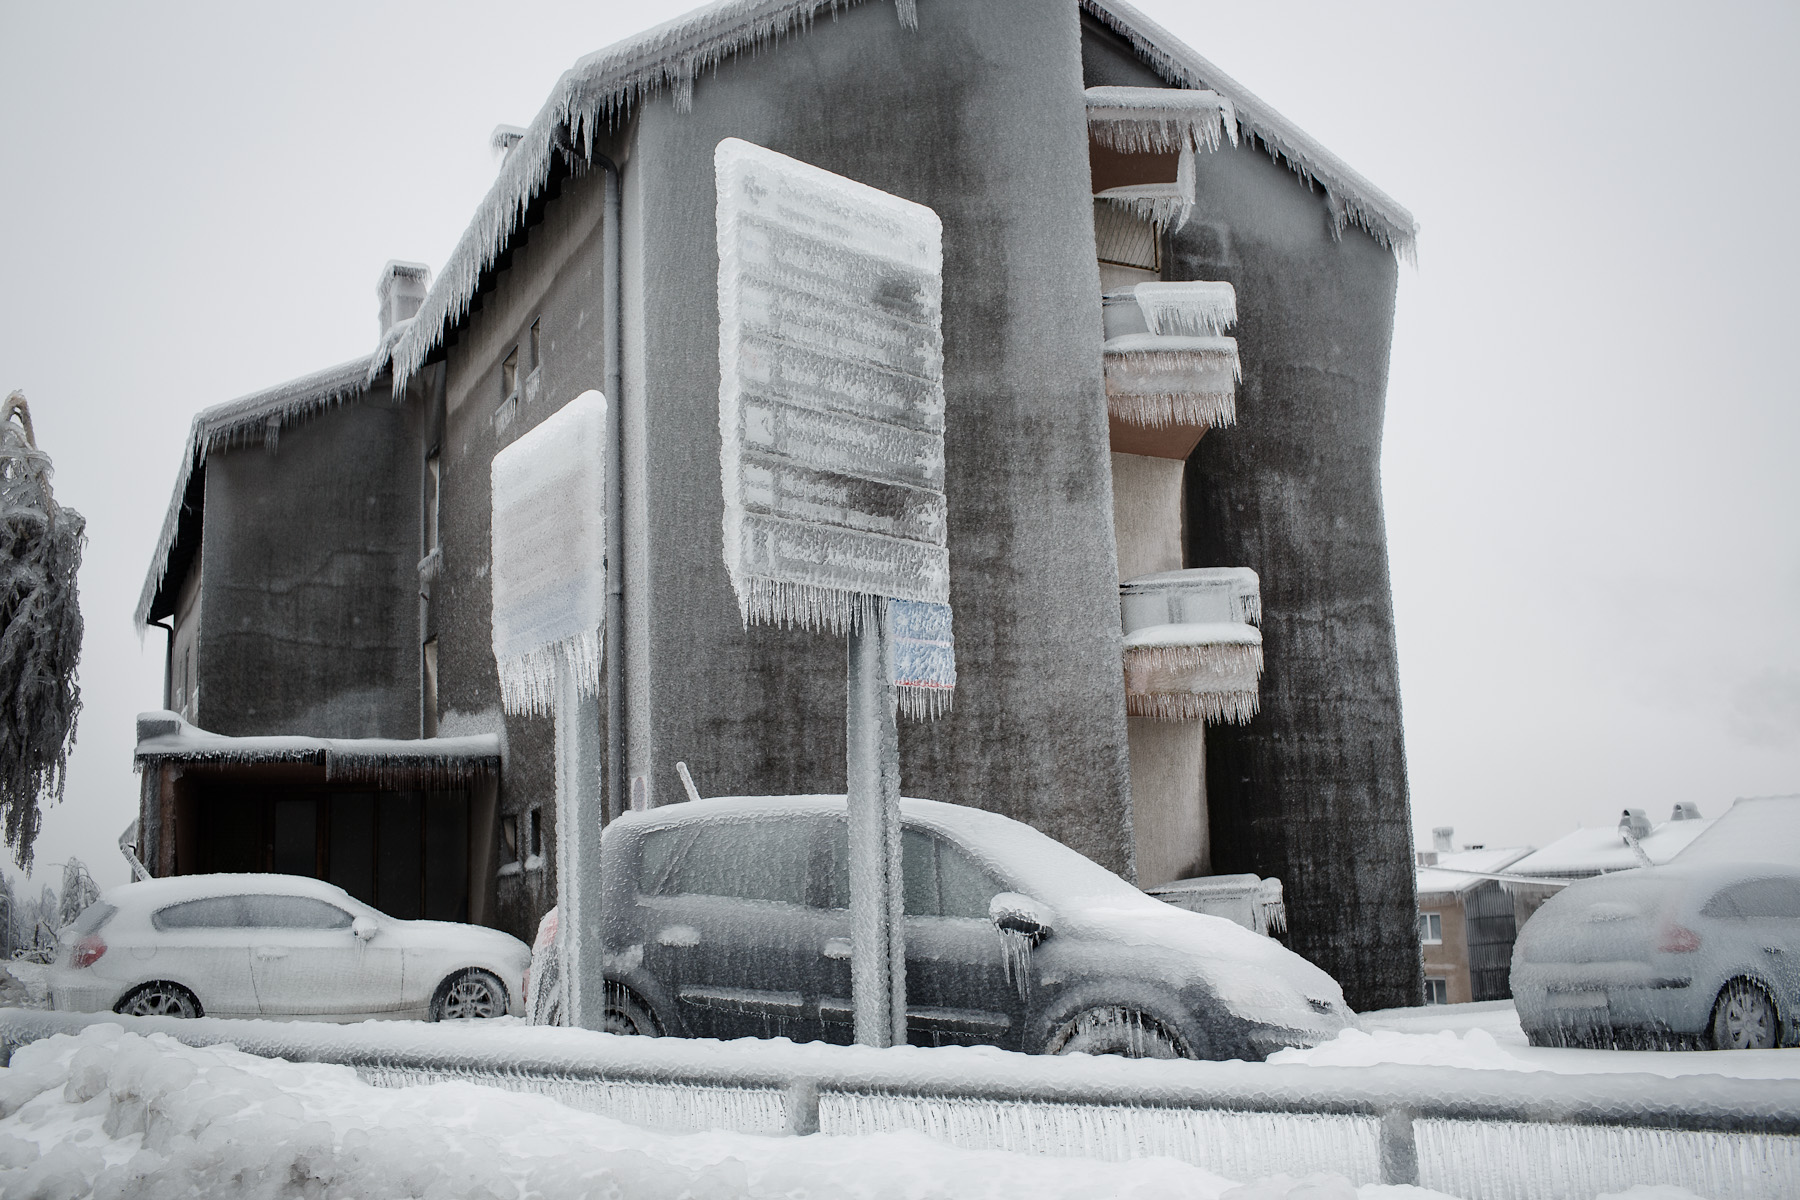 An apartment building, cars and signposts are seen covered in thick layer of ice in Postojna, Slovenia, February 5 2014.